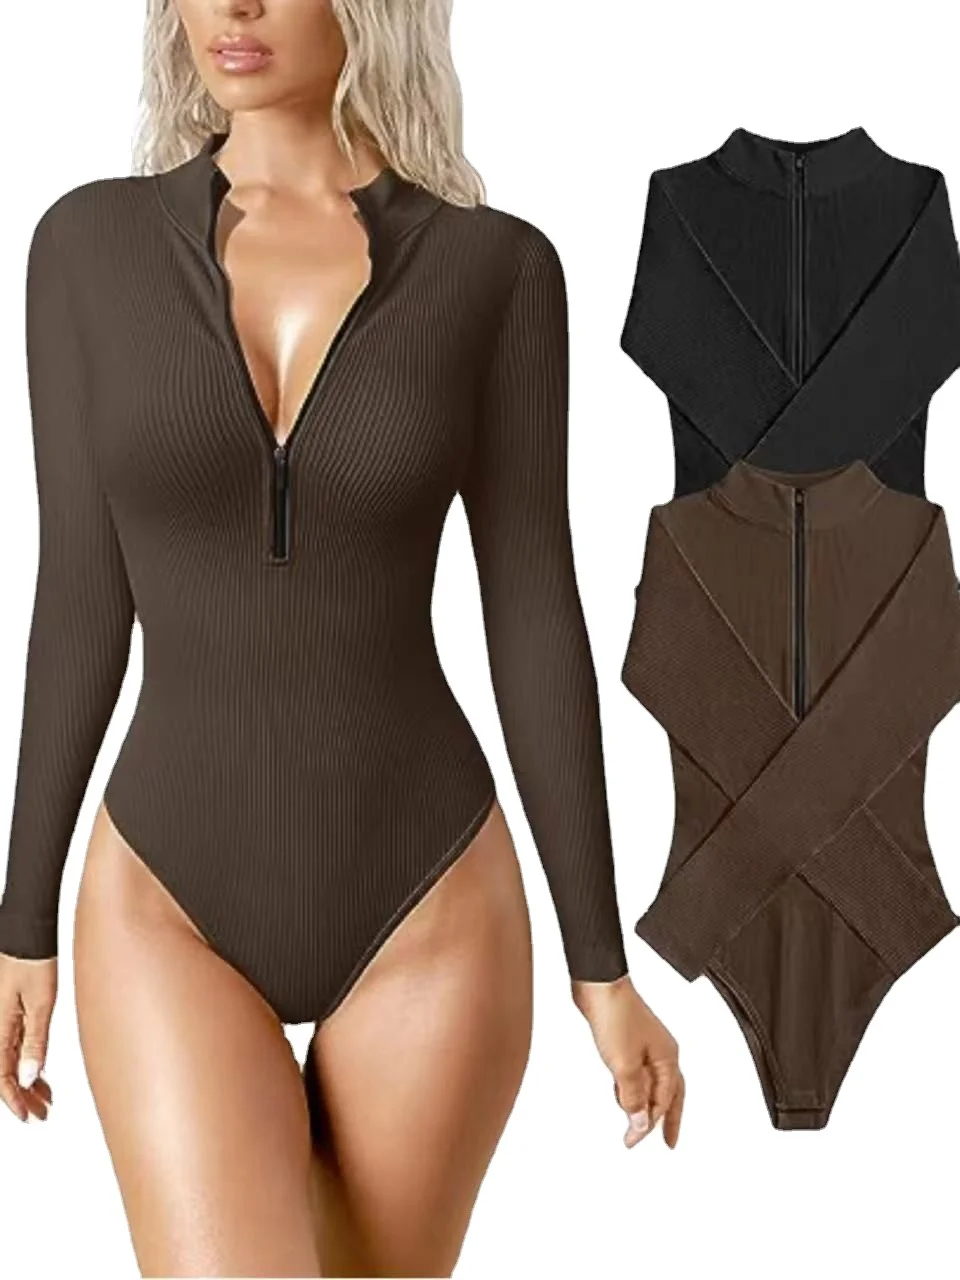 Women's Sport Jumpsuit Ribbed Tight Body Suits Sexy Outfit Fitness Workout Yoga Long Sleeve Bodysuit Zipper One Piece Bodysuit summer women s neck style backless slim patent cloth jumpsuit red zipper sleeveless artificial leather skin tight garment custom